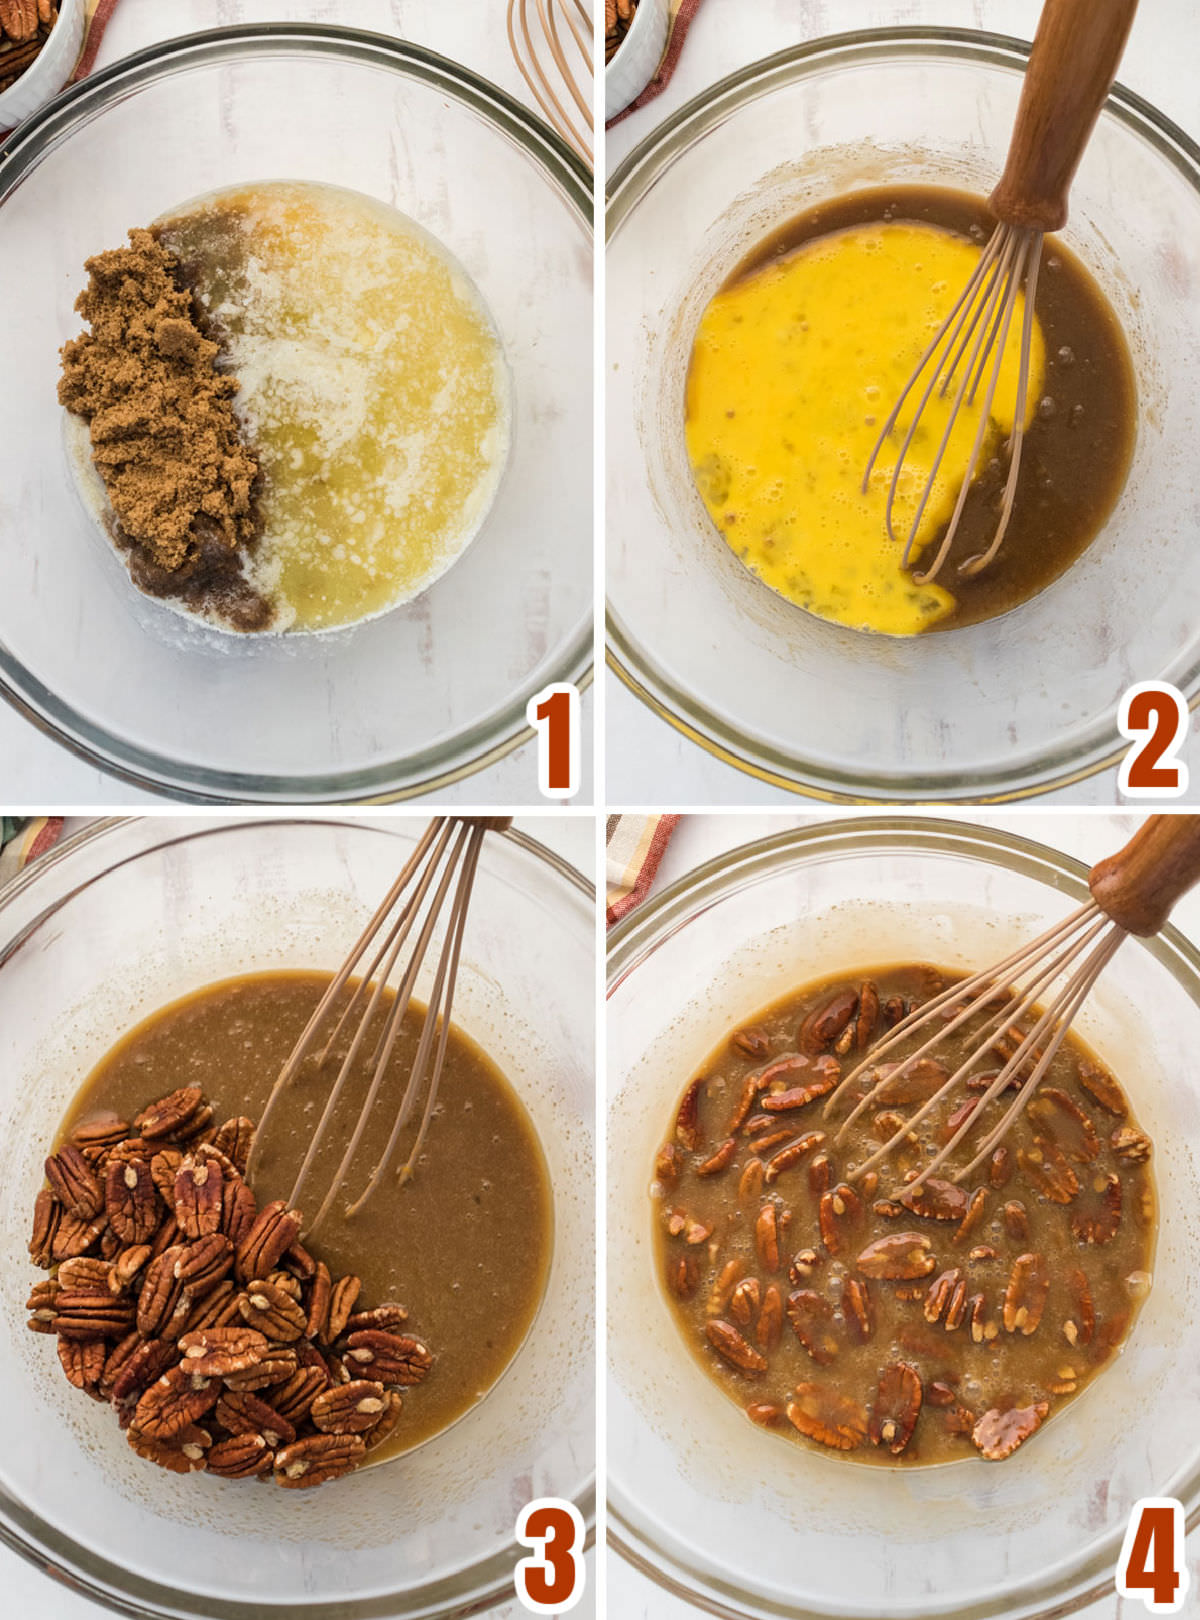 Collage image showing the steps for making the Pecan Pie filling.